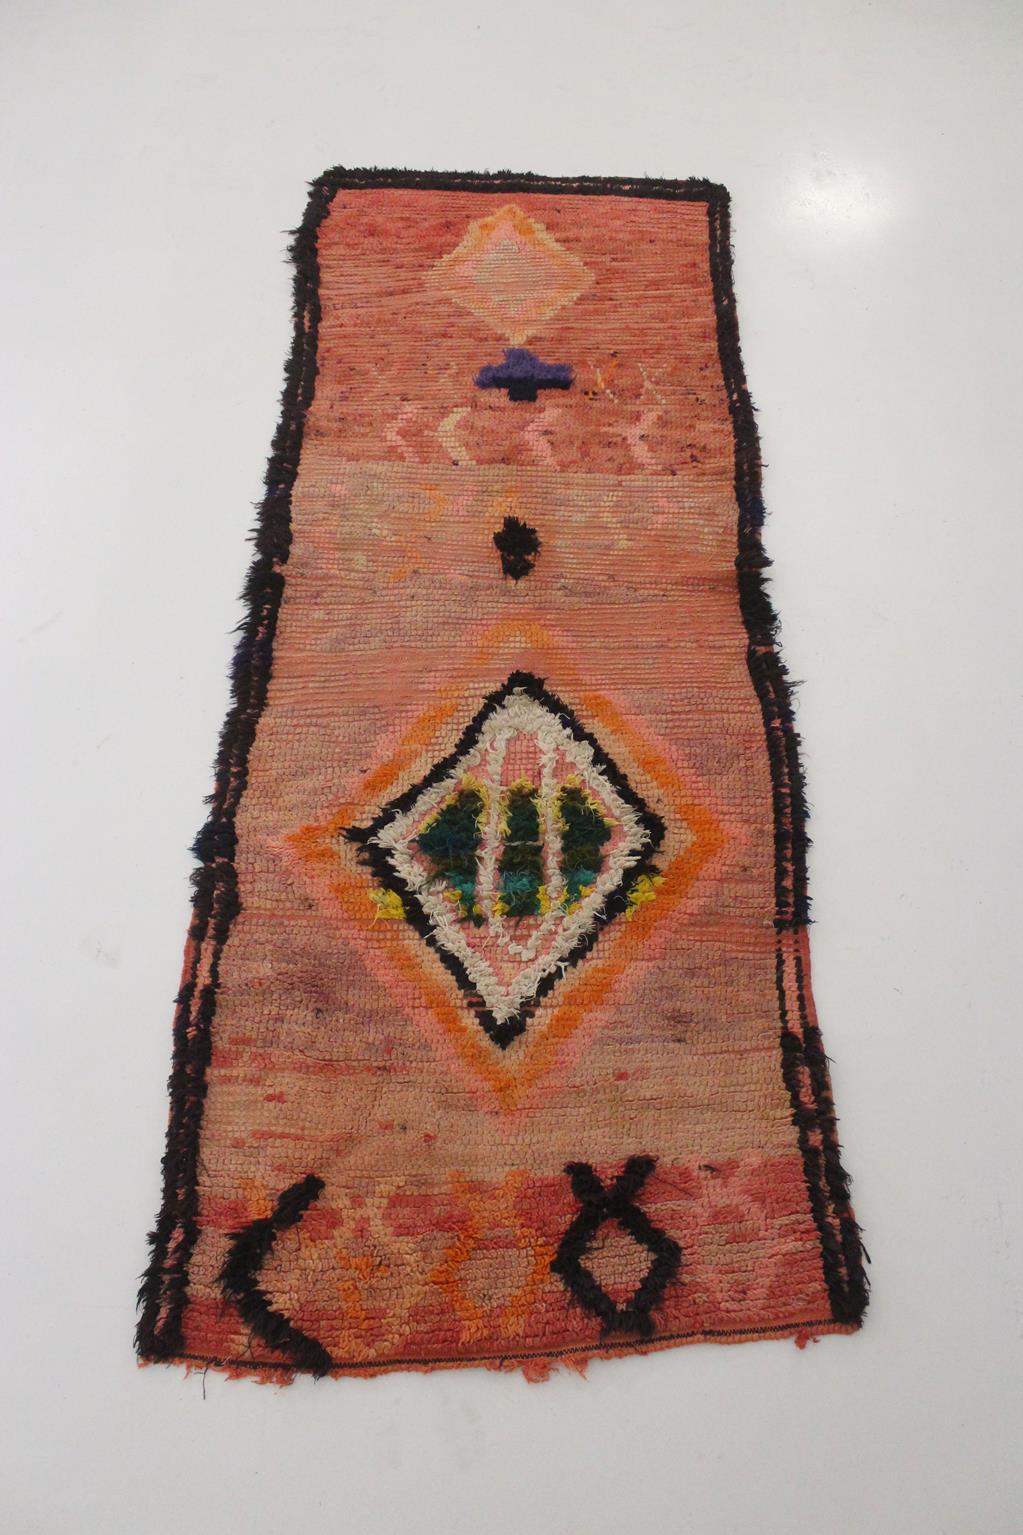 Vintage Moroccan Boujad runner rug - Orange-pink - 3x8.1feet / 93x247cm In Good Condition For Sale In Marrakech, MA